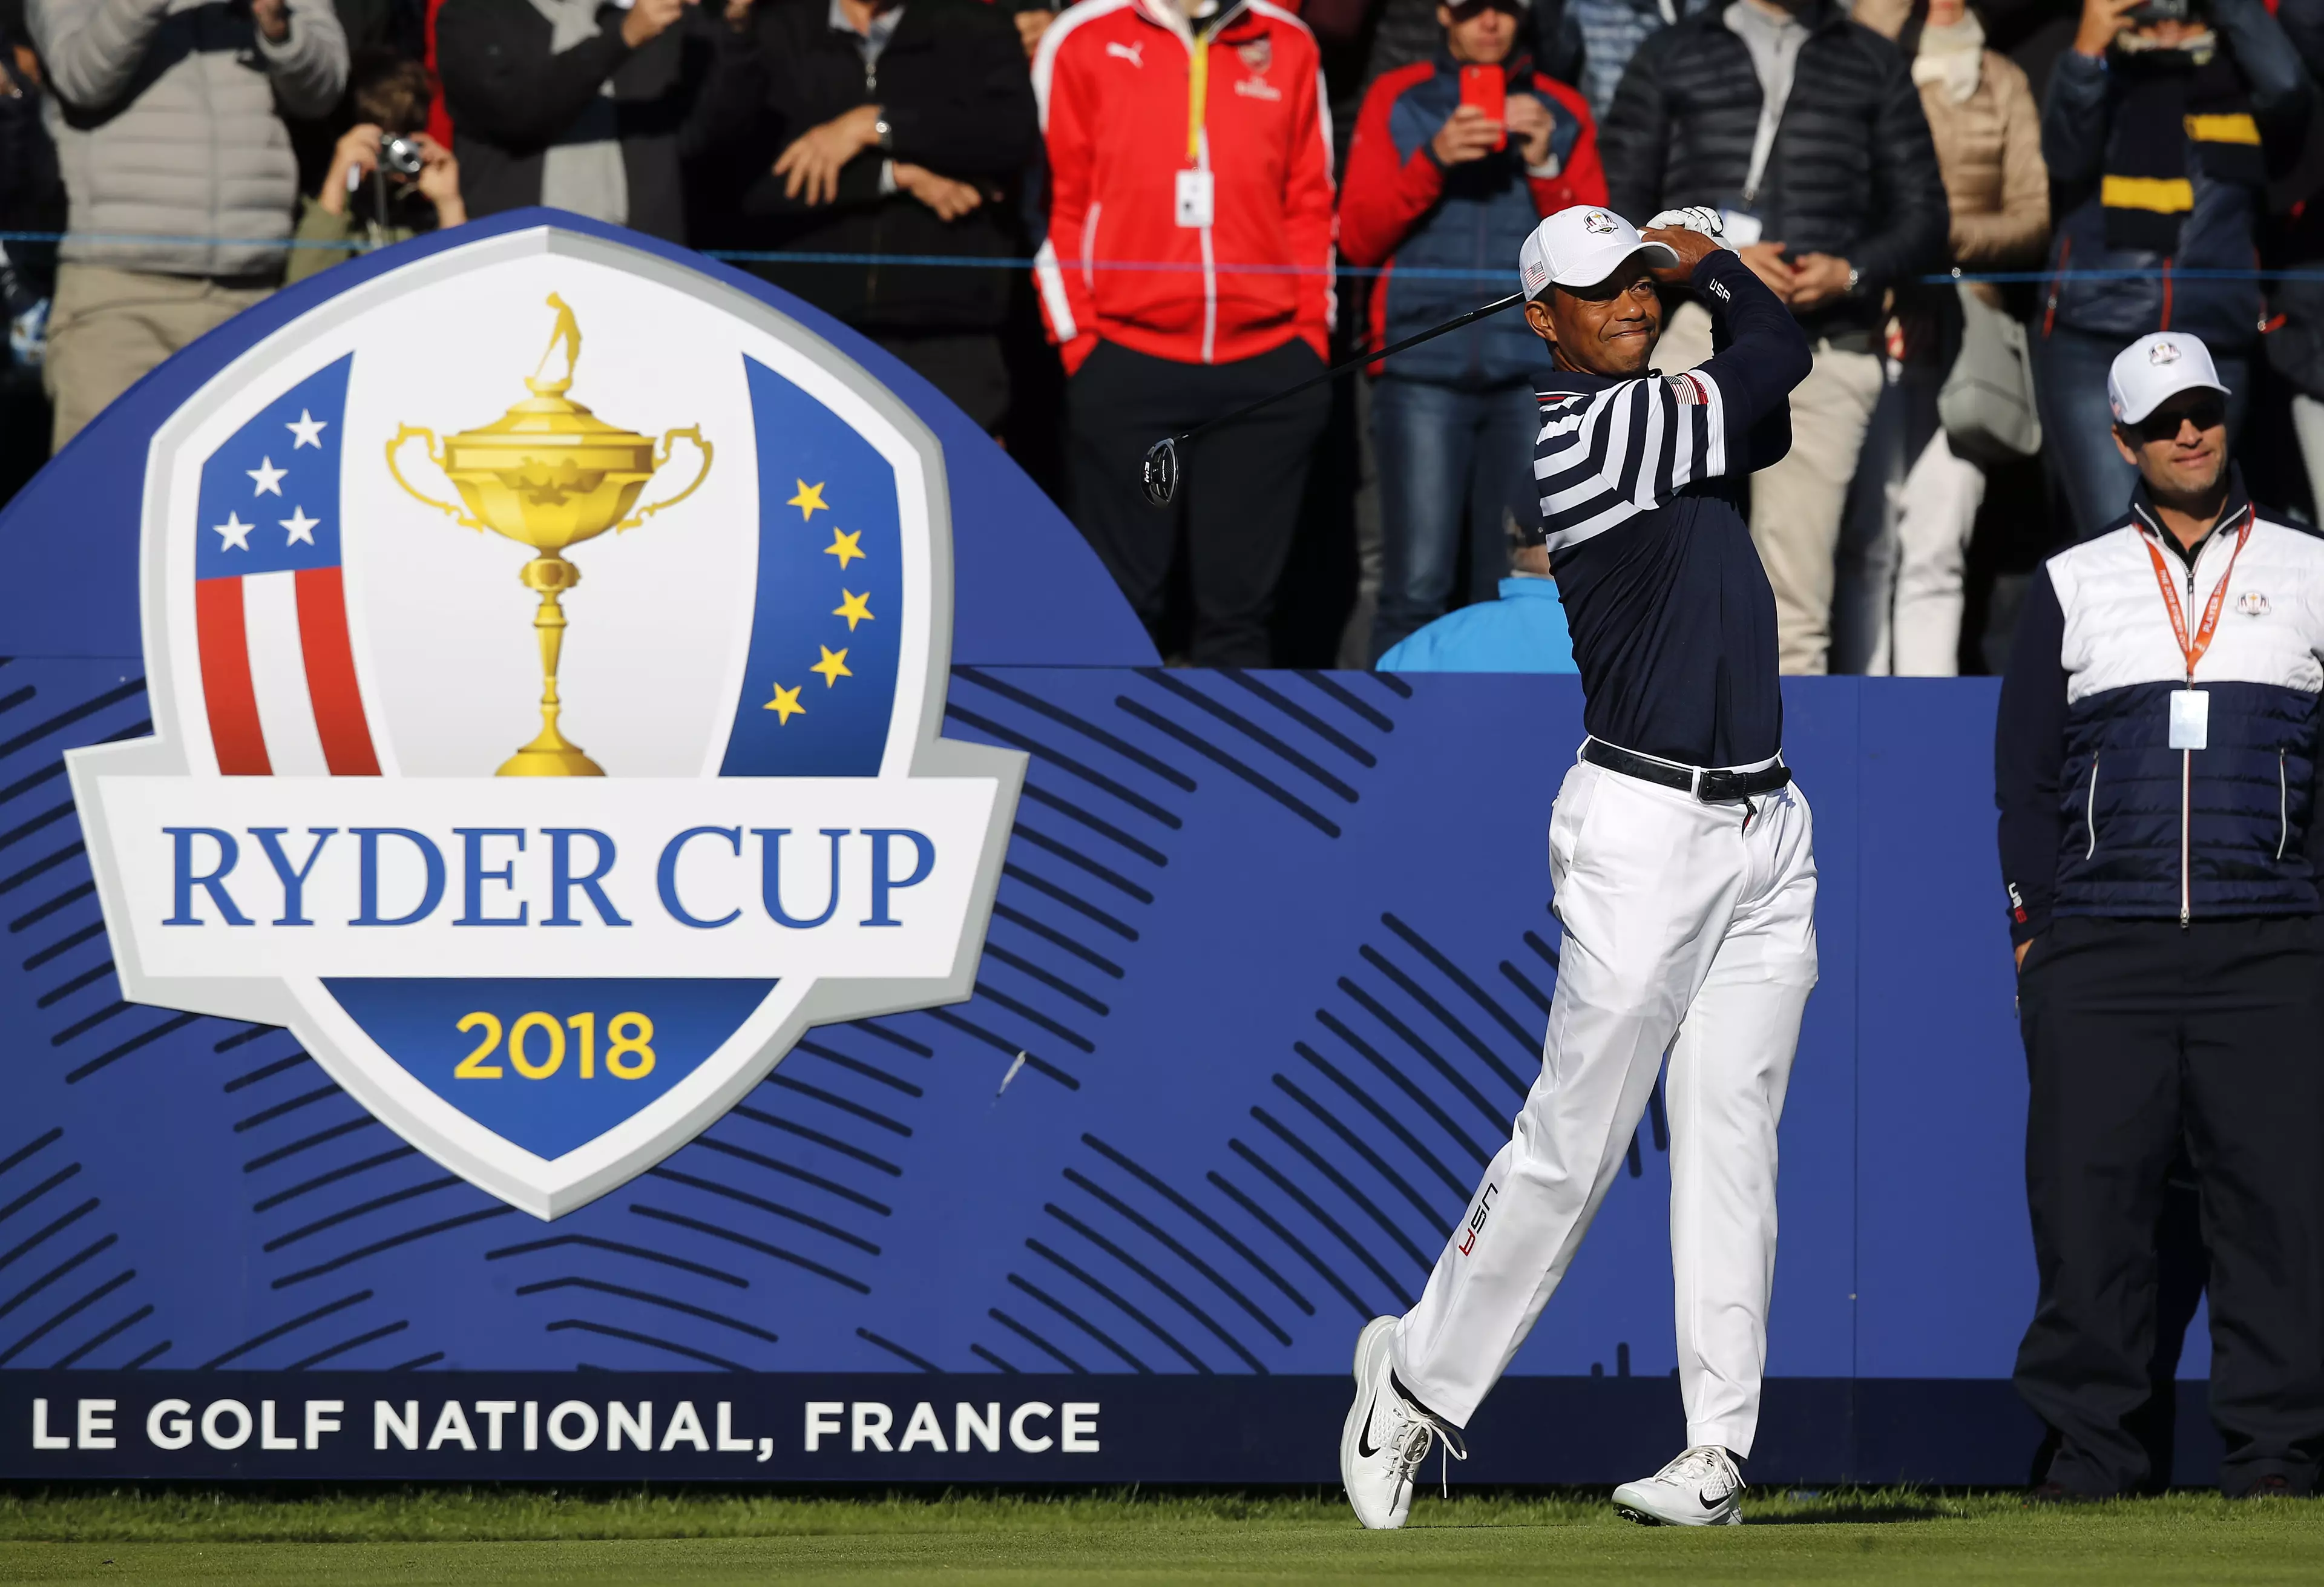 Tiger Woods At The Ryder Cup